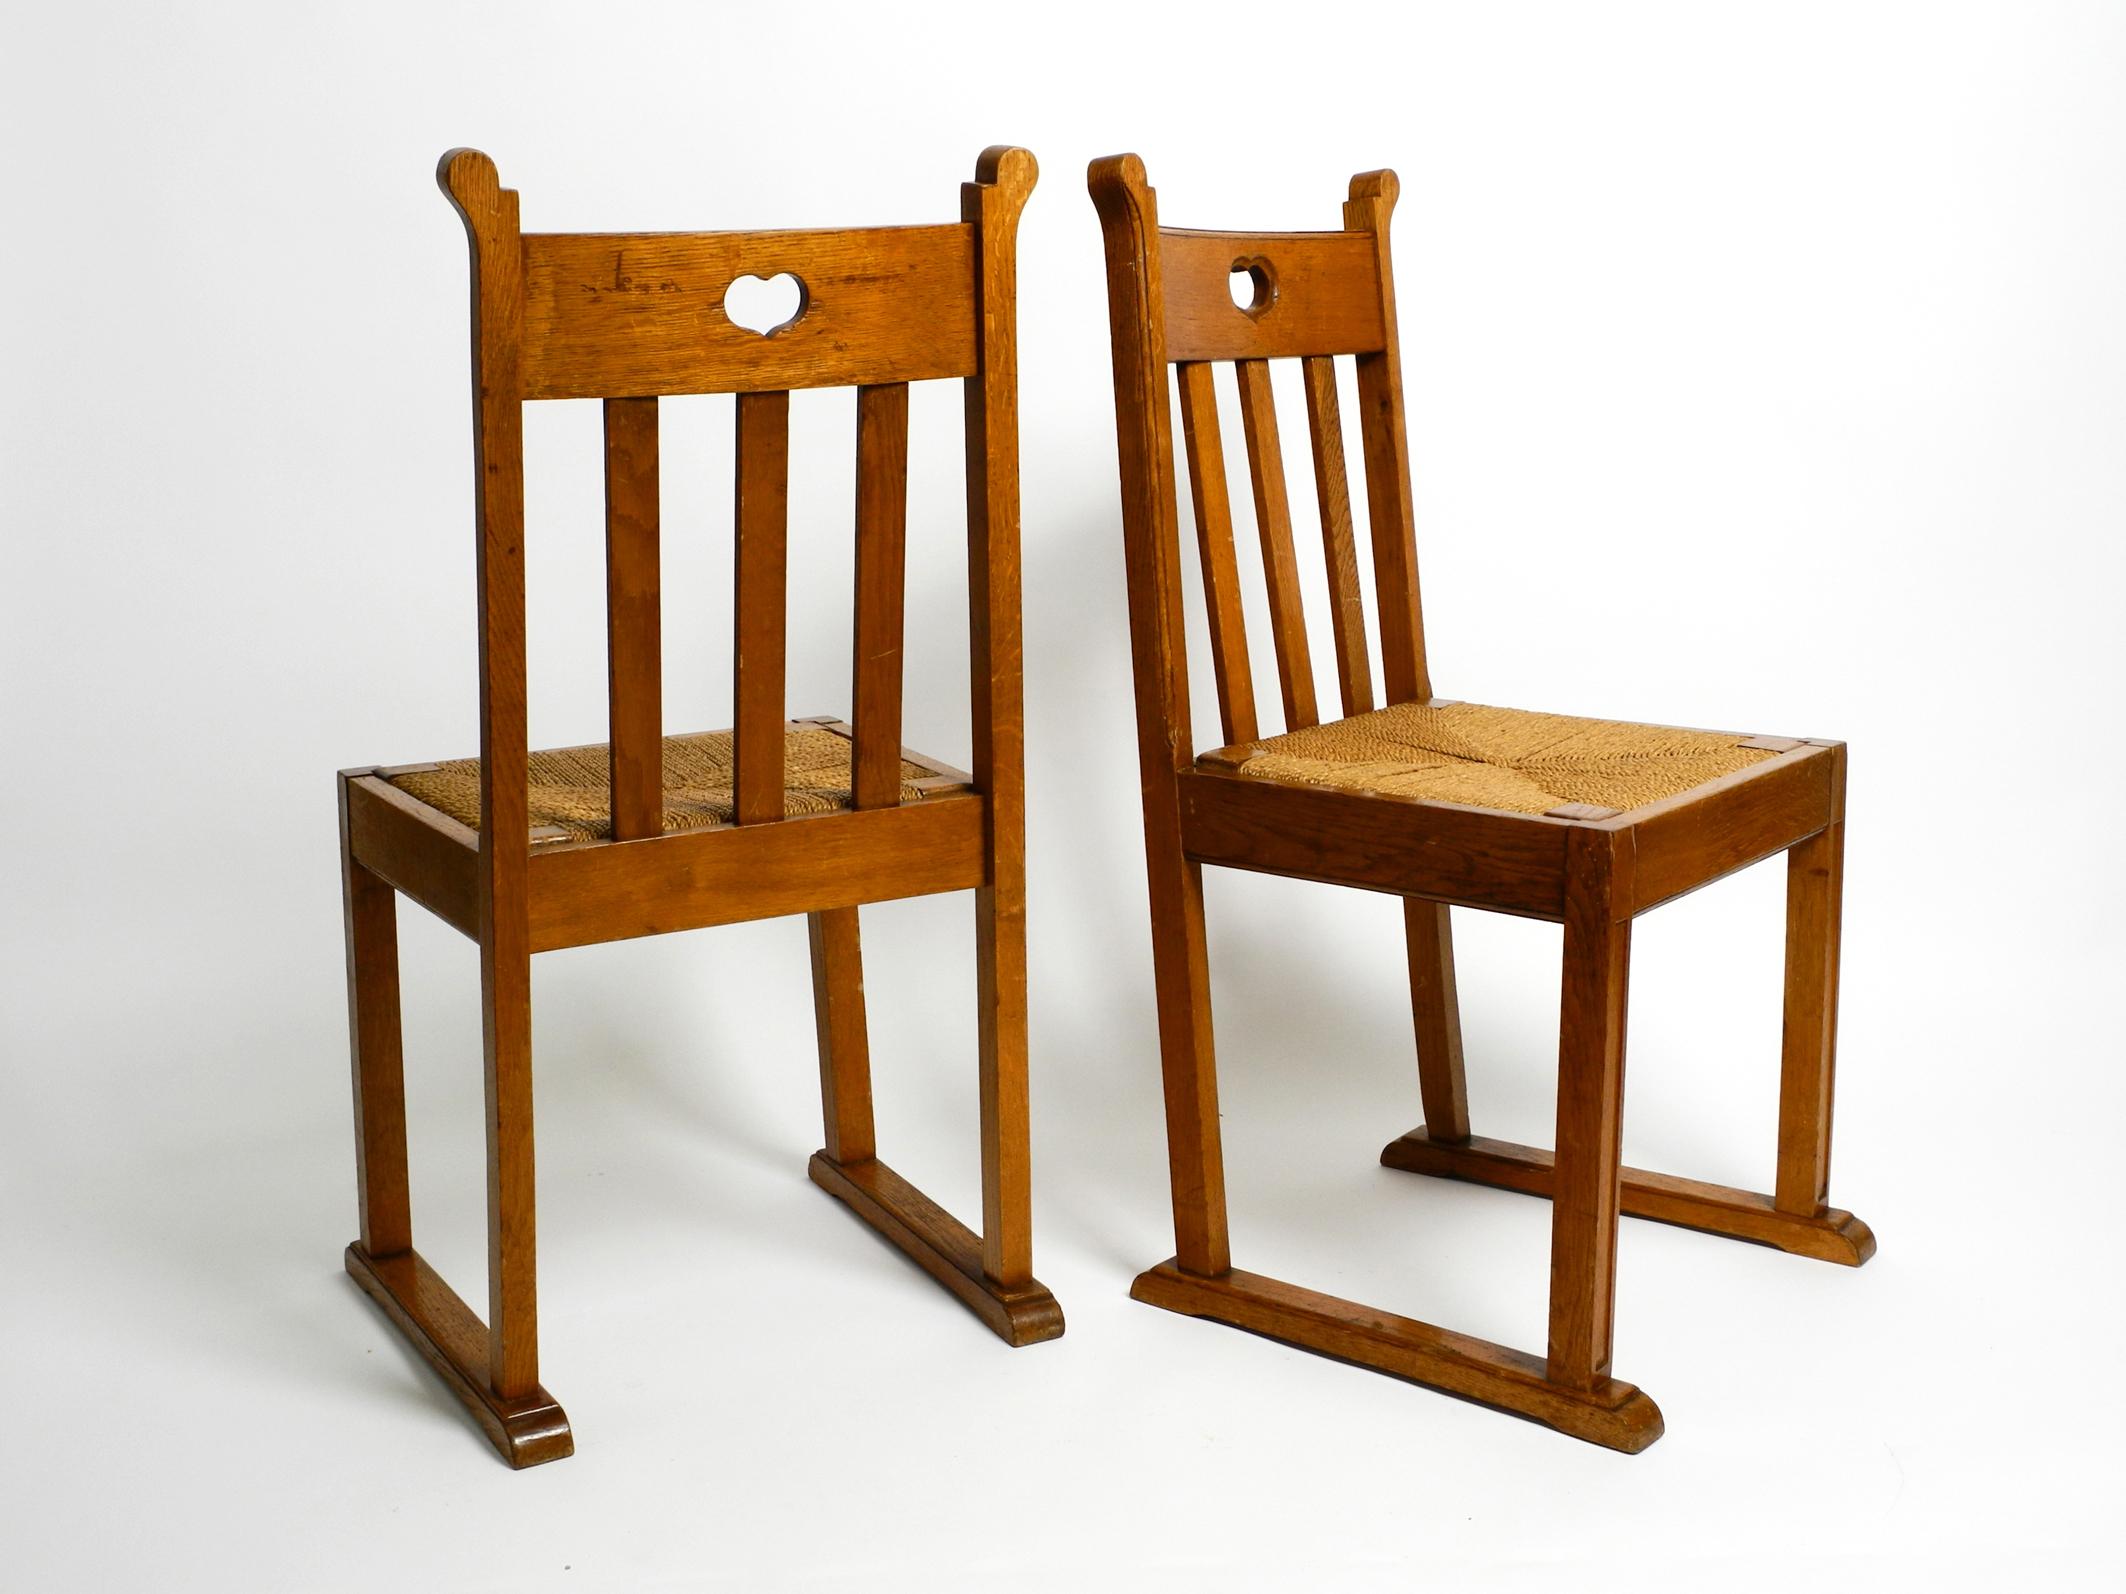 Pair of Beautiful Rare Mid Century Oak Chairs with Skid Feet and Wicker Seats In Good Condition For Sale In München, DE